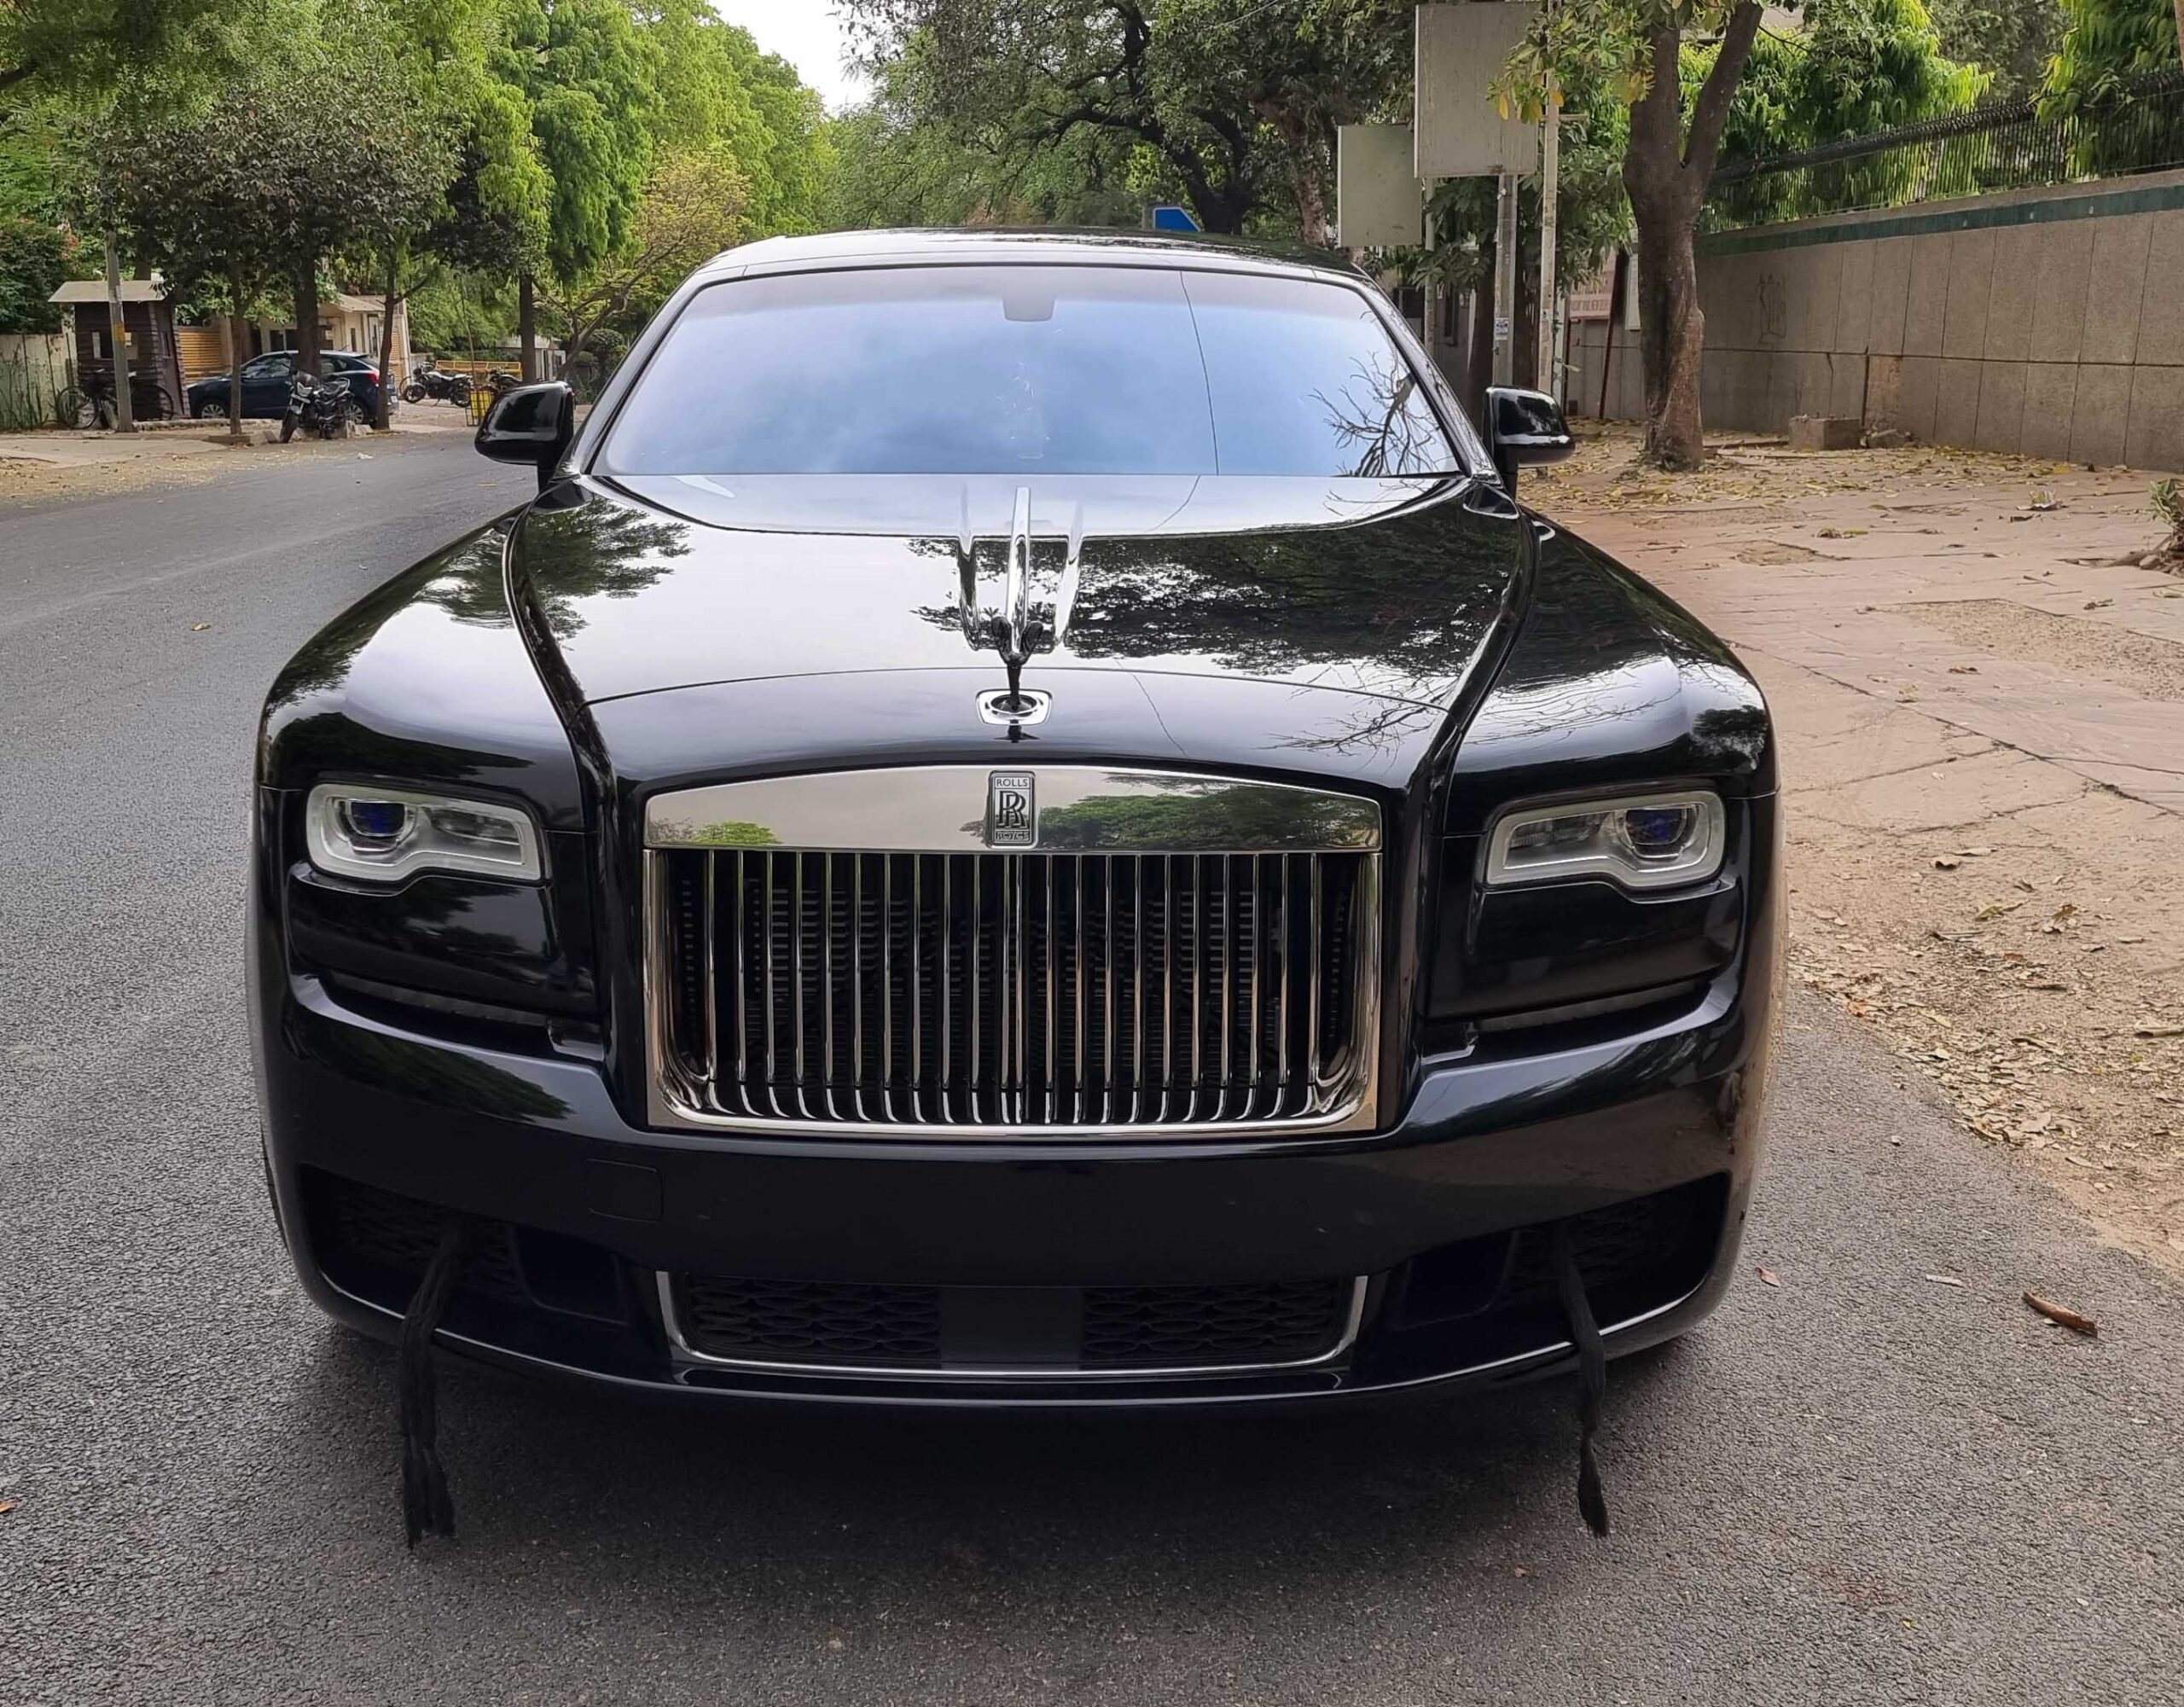 Used 2012 RollsRoyce Ghost Extended Wheelbase for sale in Mumbai at  Rs26500000  CarWale